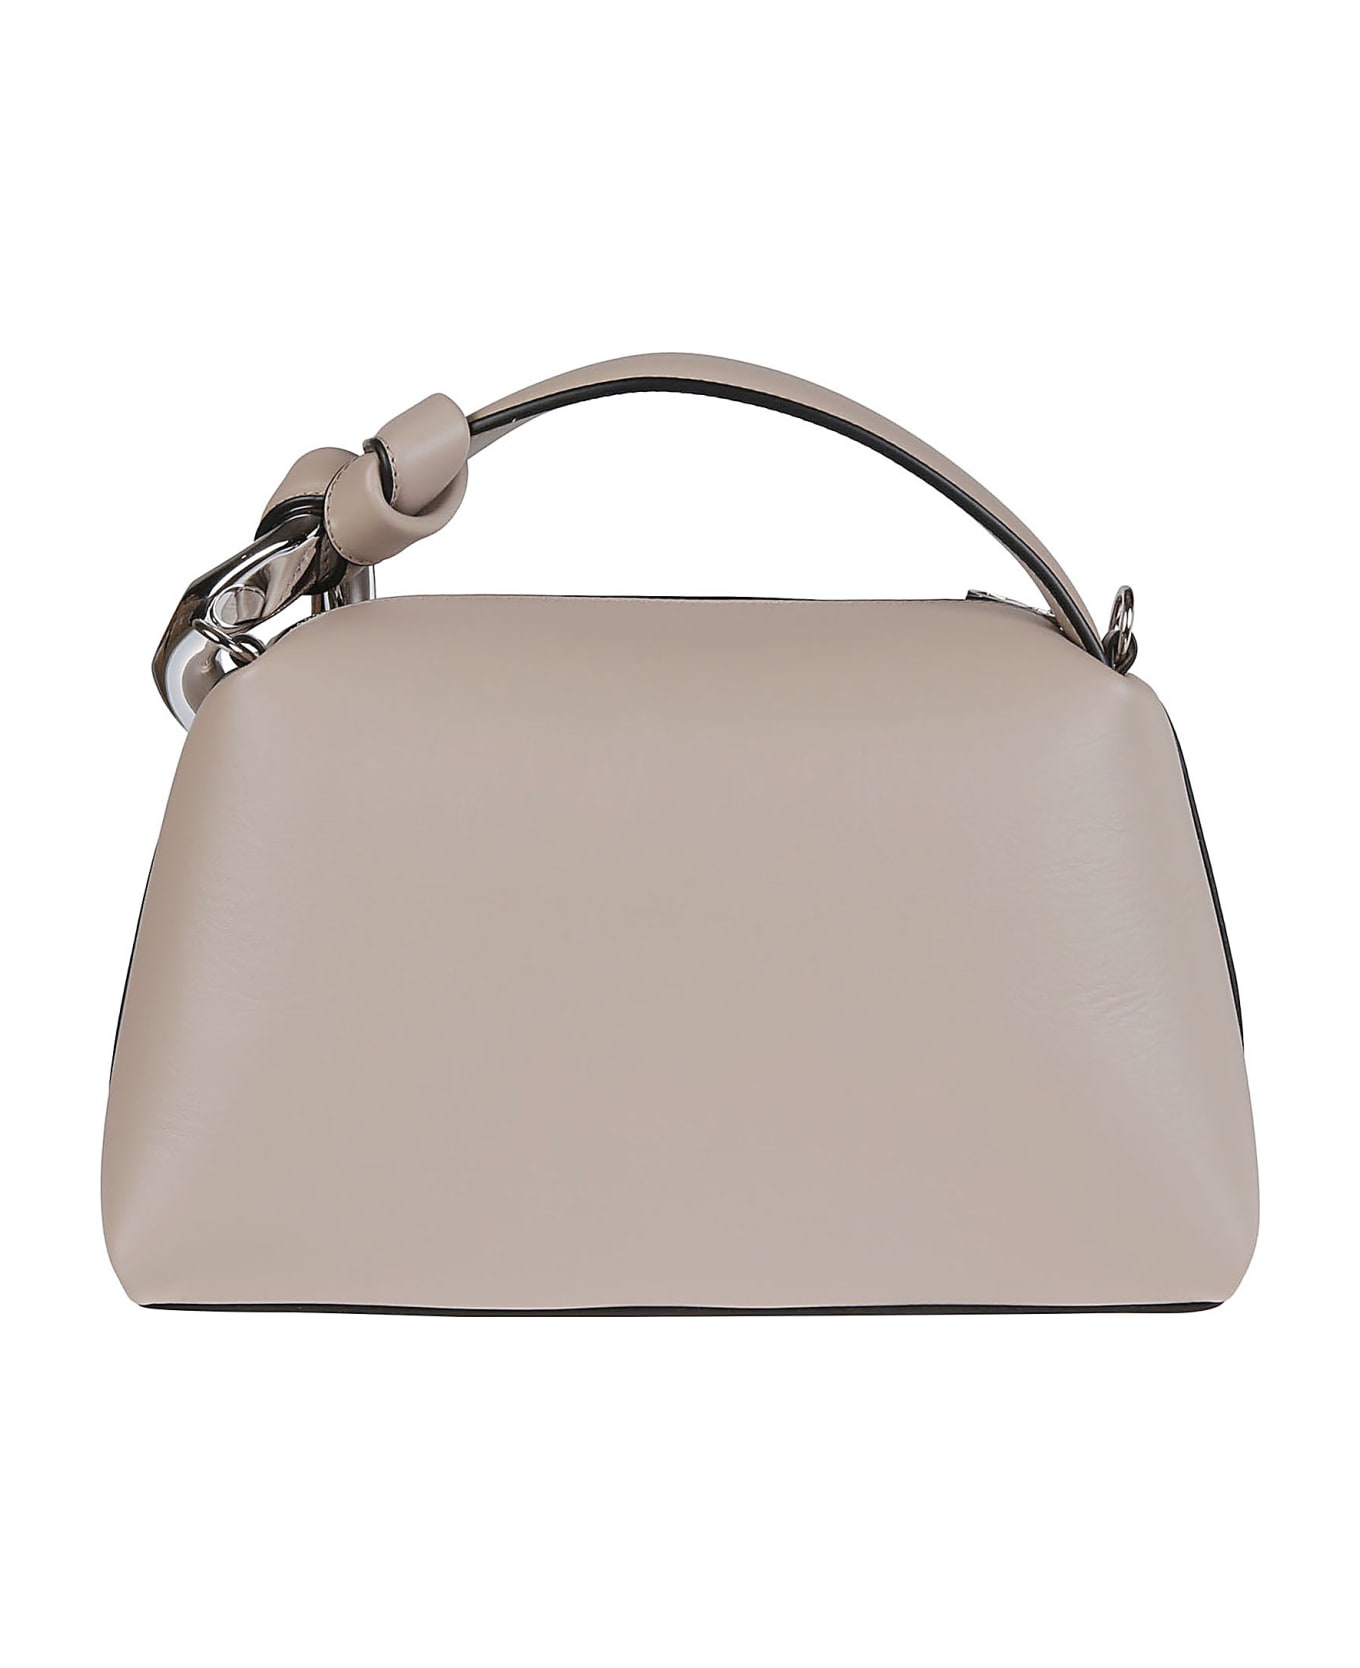 J.W. Anderson The Corner Bag - Taupe トートバッグ